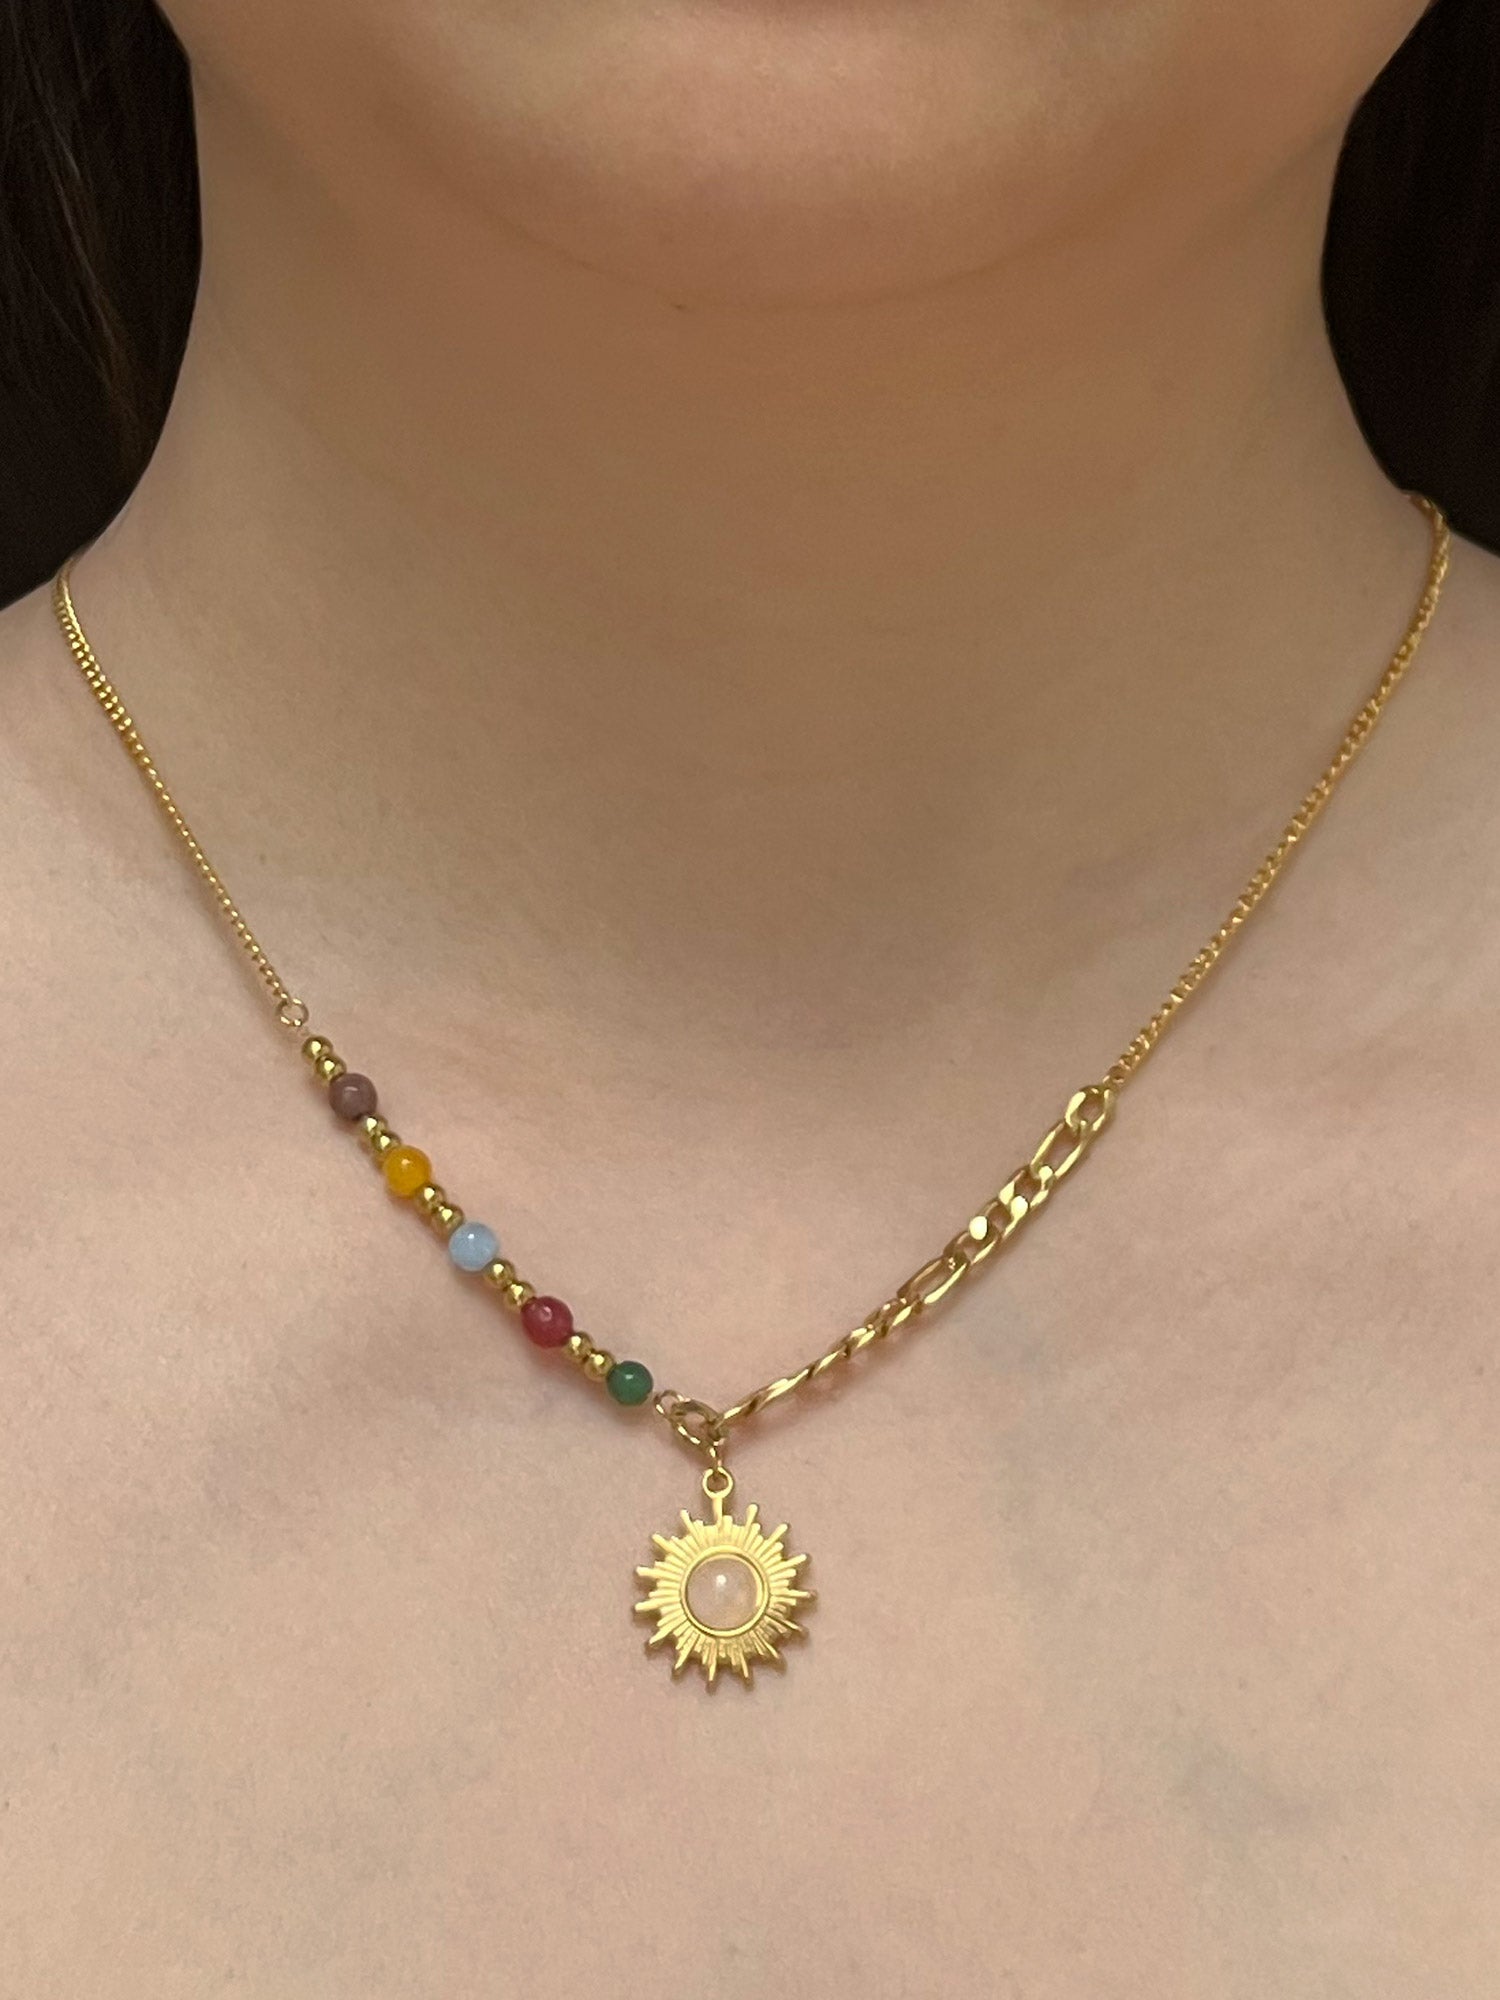 The Sun Theory Necklace